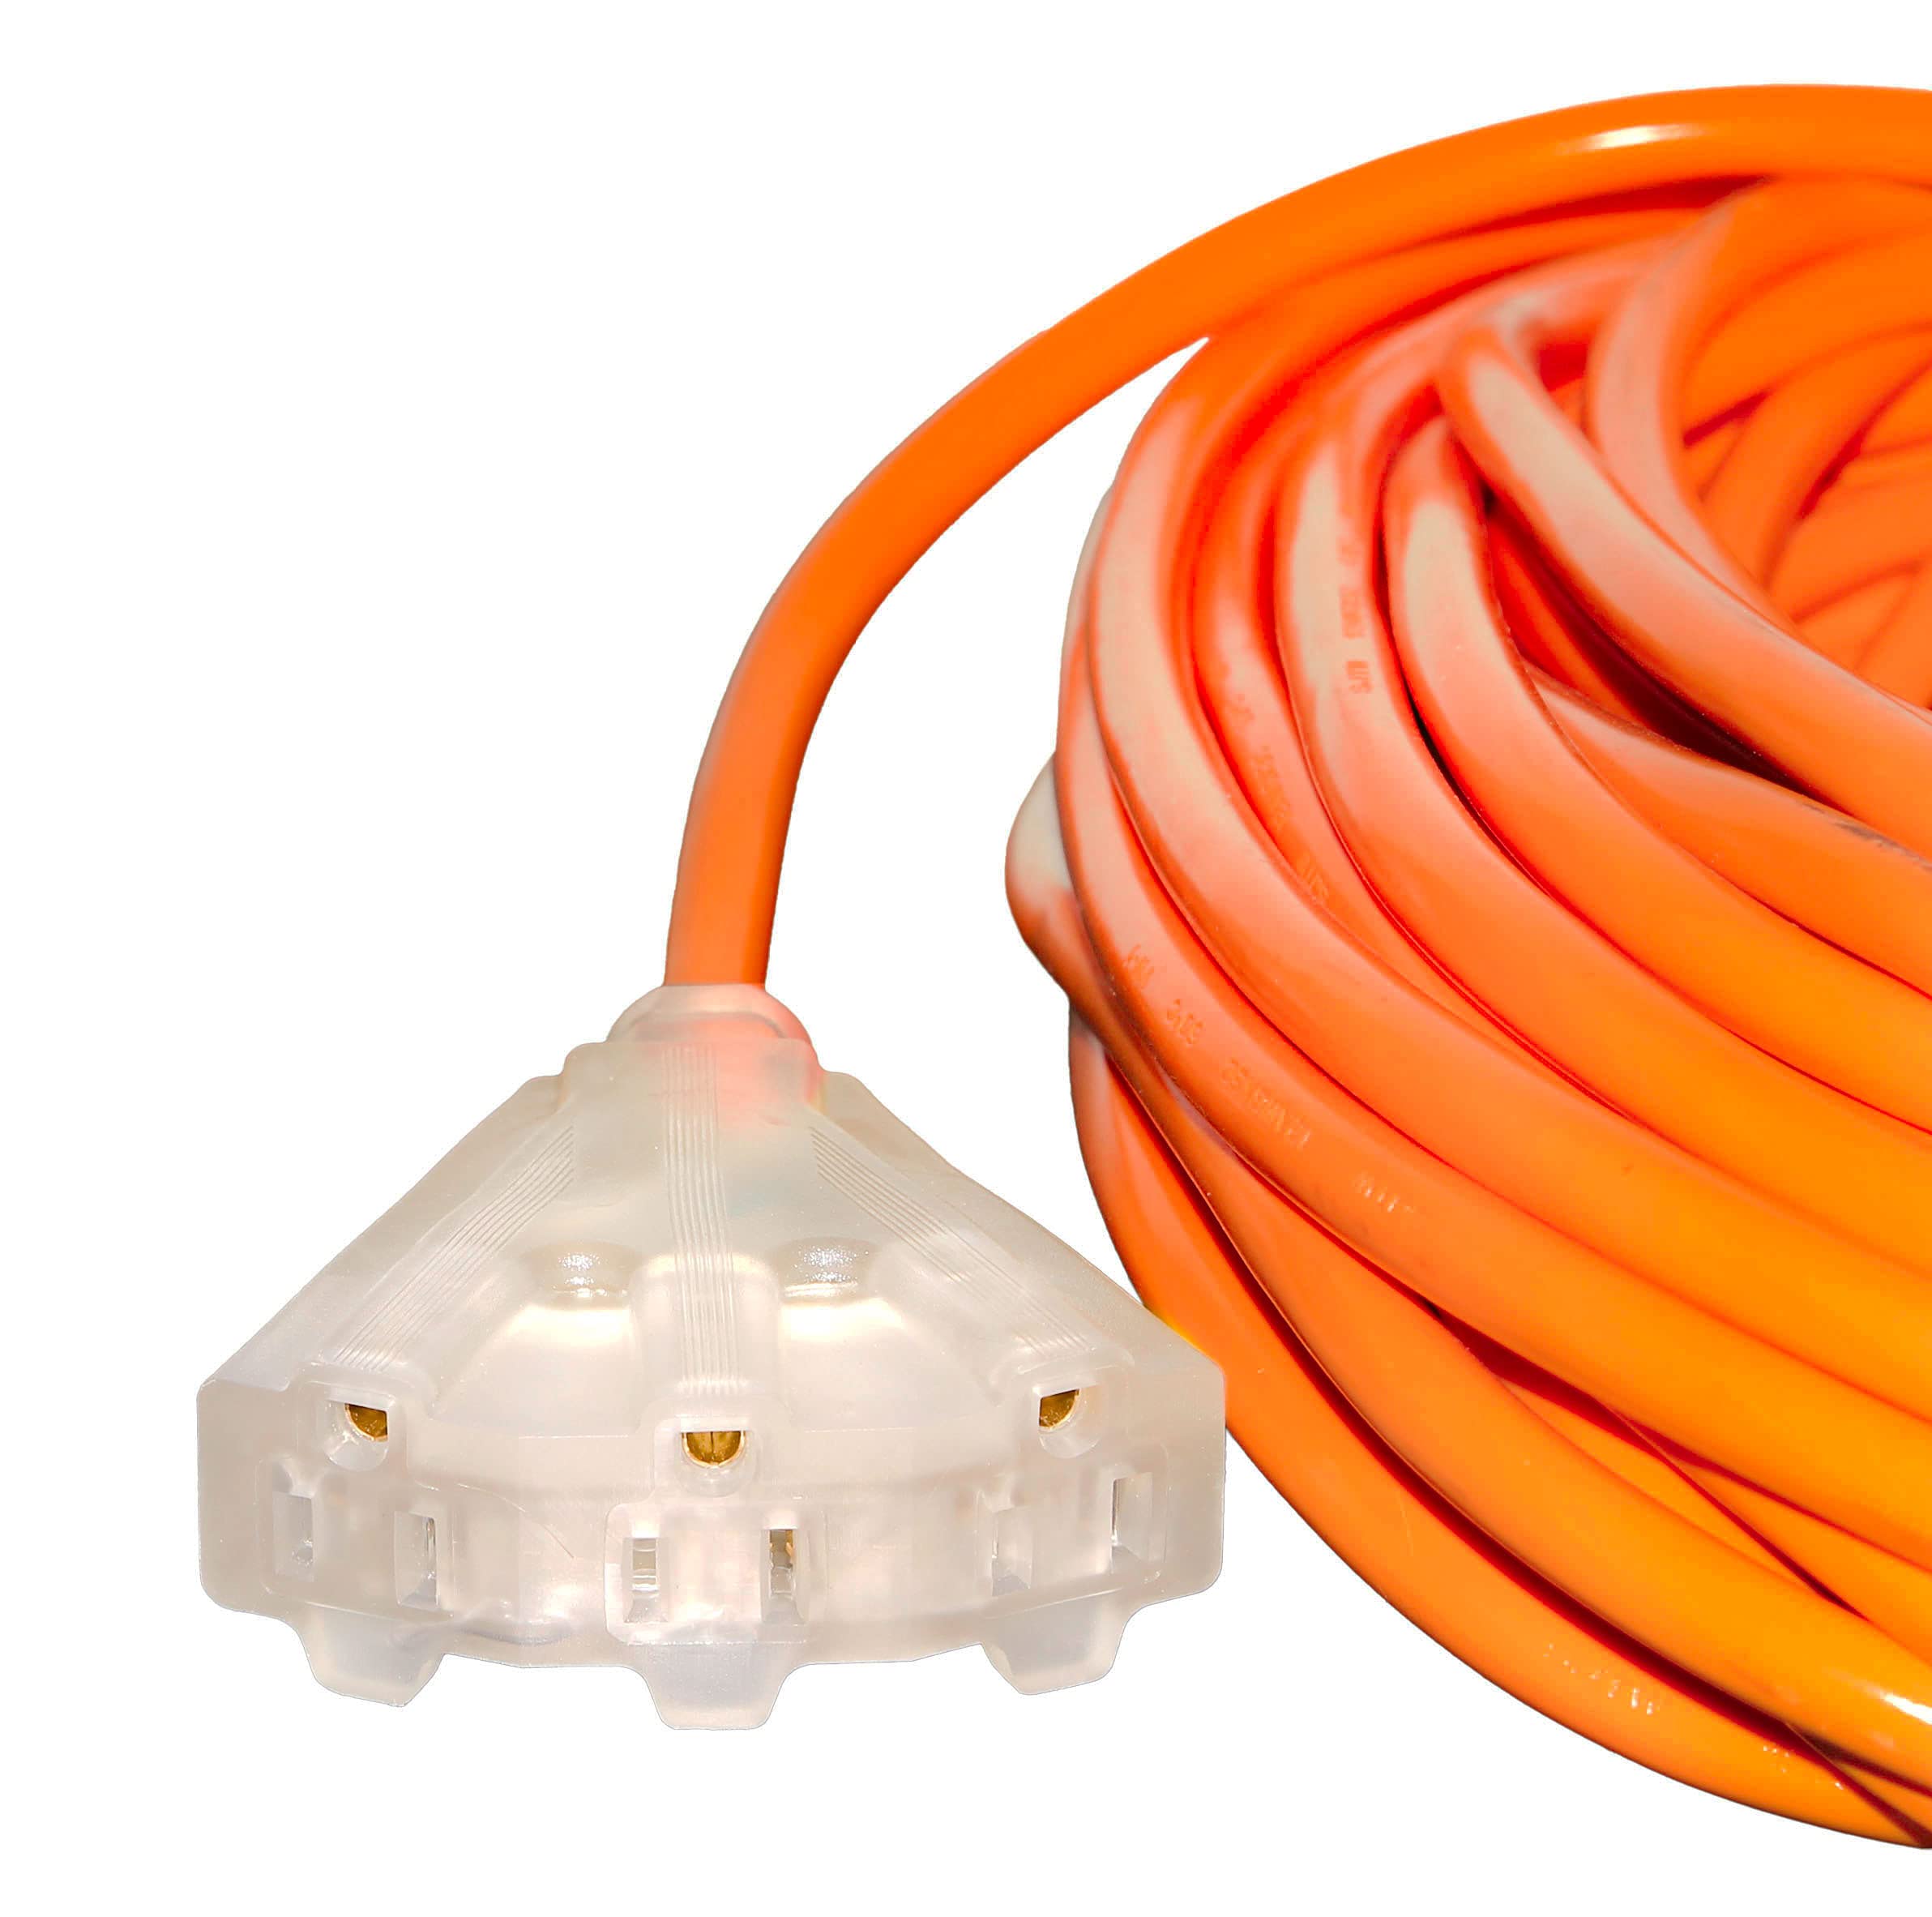 ft Power Extension Cord Outdoor  Indoor Heavy Duty 12 gauge/3 prong SJTW  (Orange) Lighted end 3-outlet Extra Durability 15 AMP 125 Volts 1875 Watts  ETL listed by LifeSupplyUSA